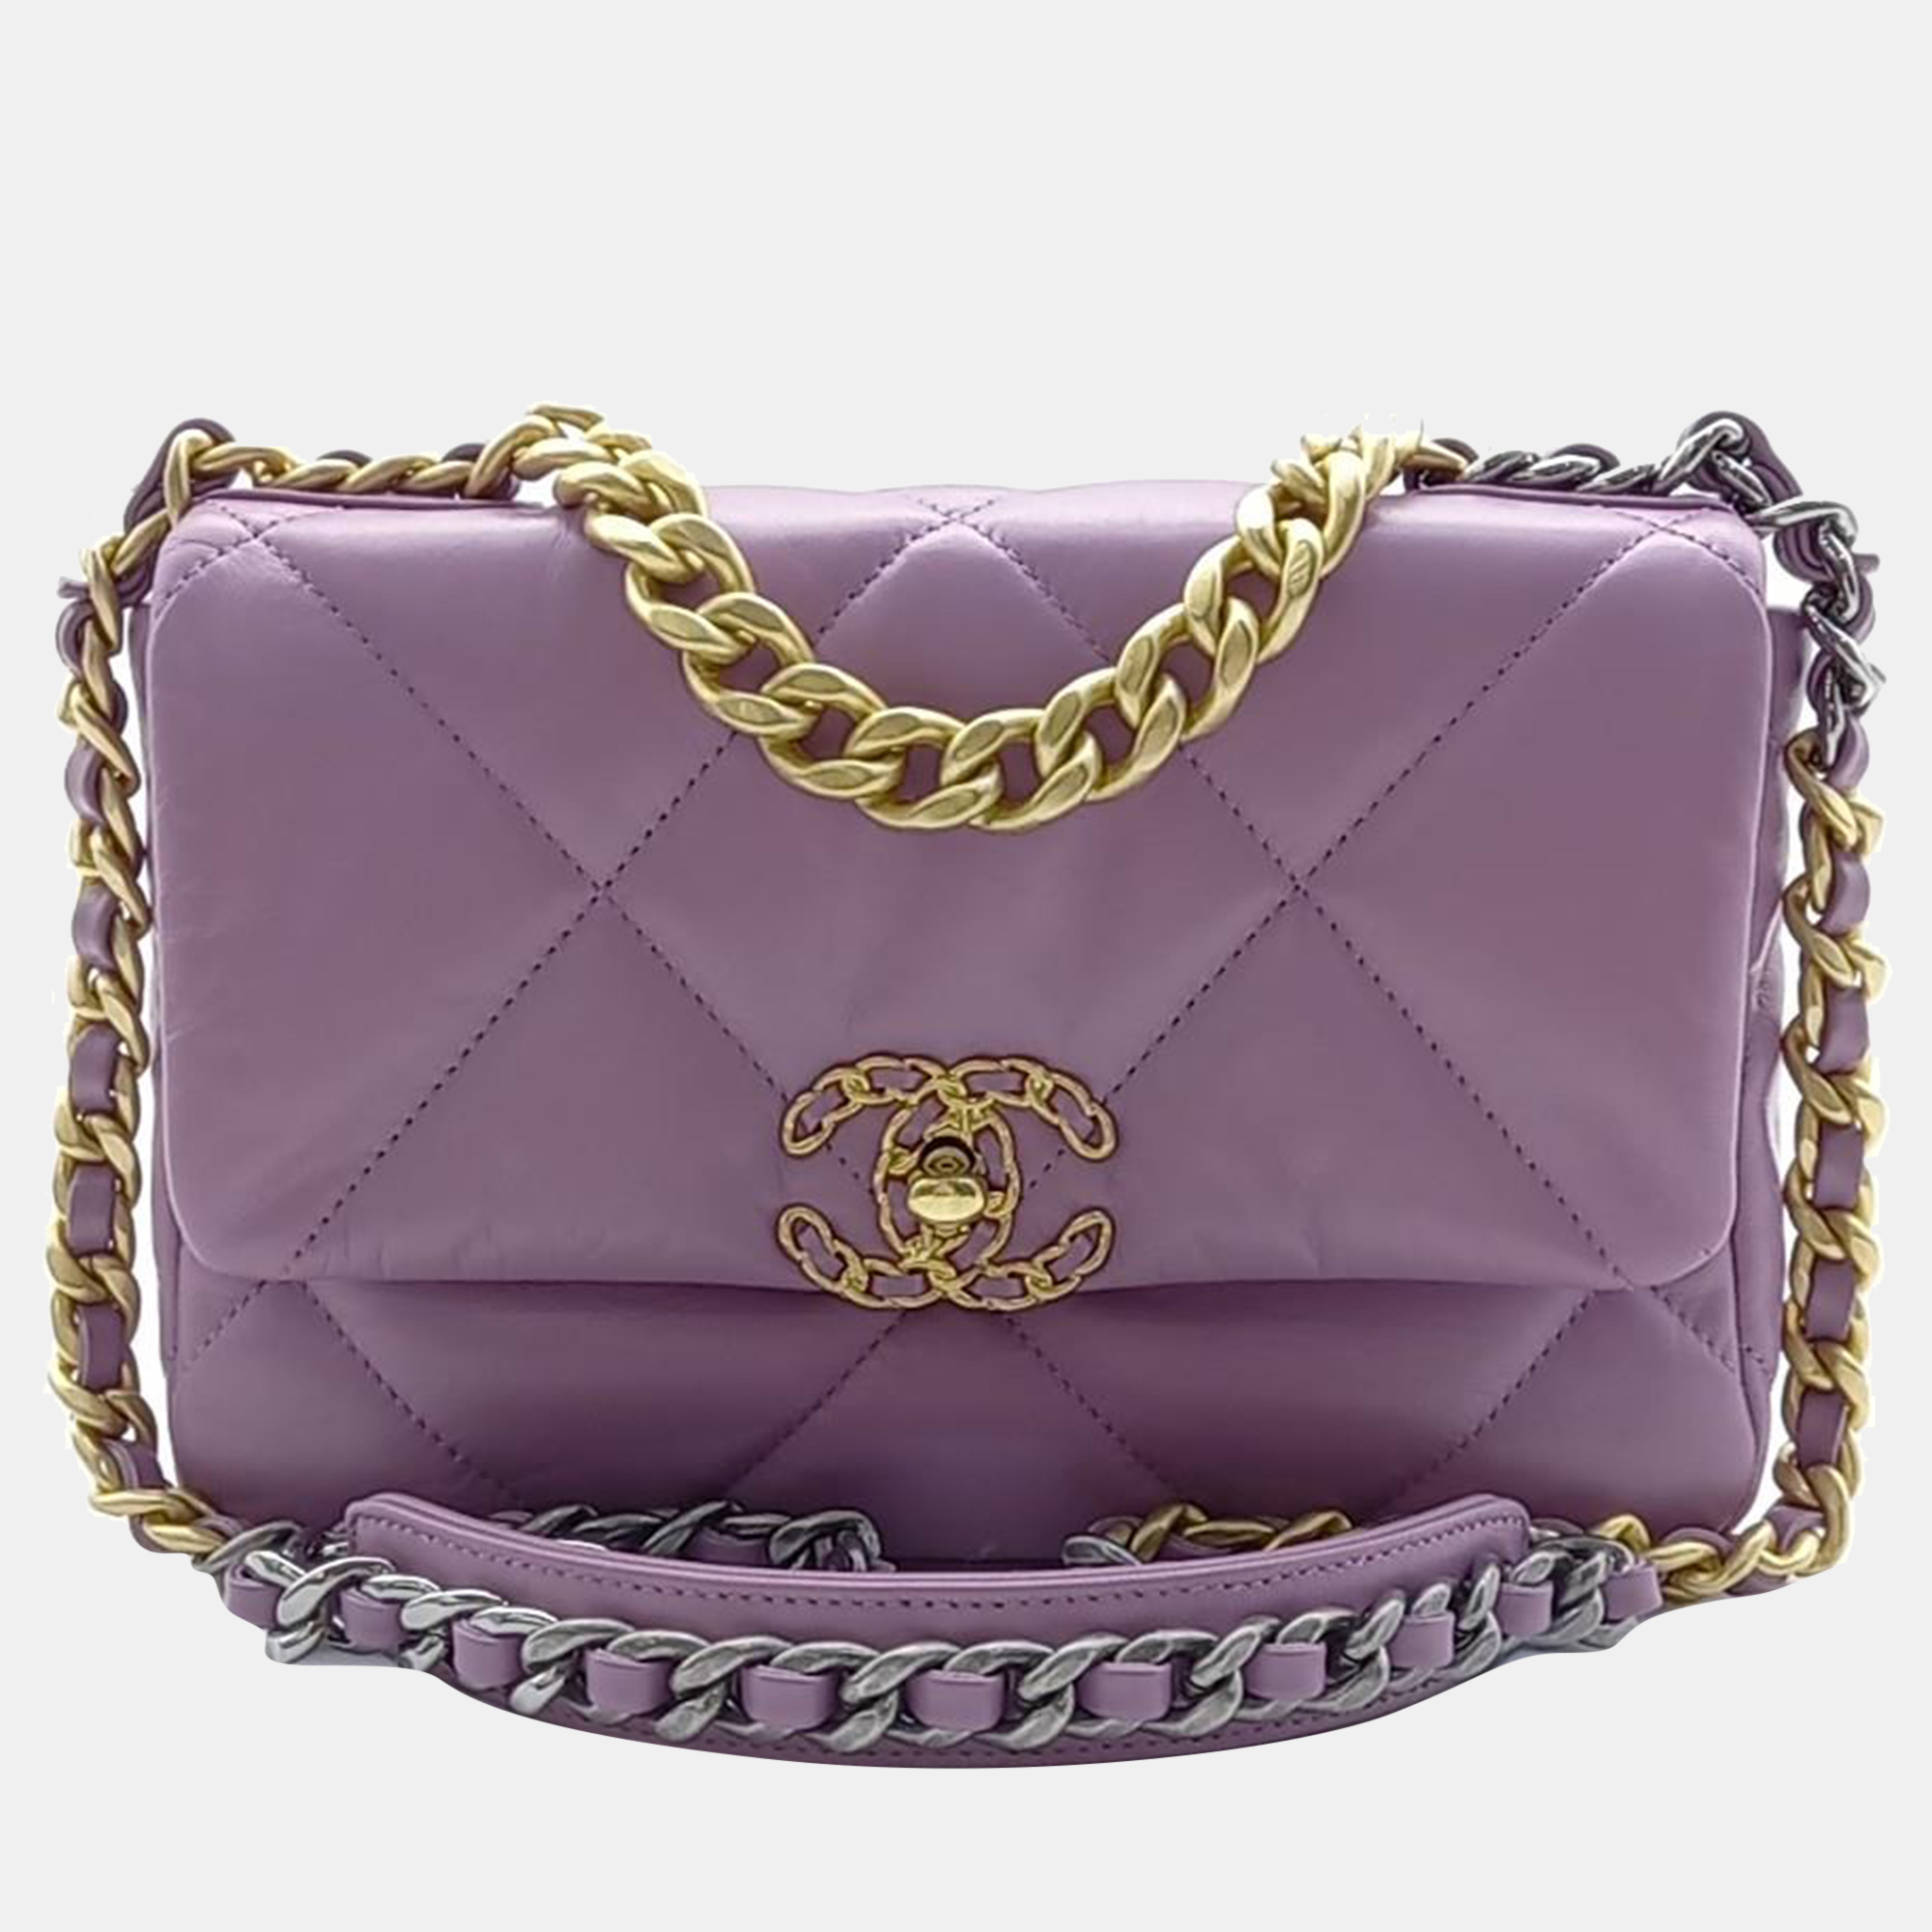 Chanel purple leather small 19 flap bag